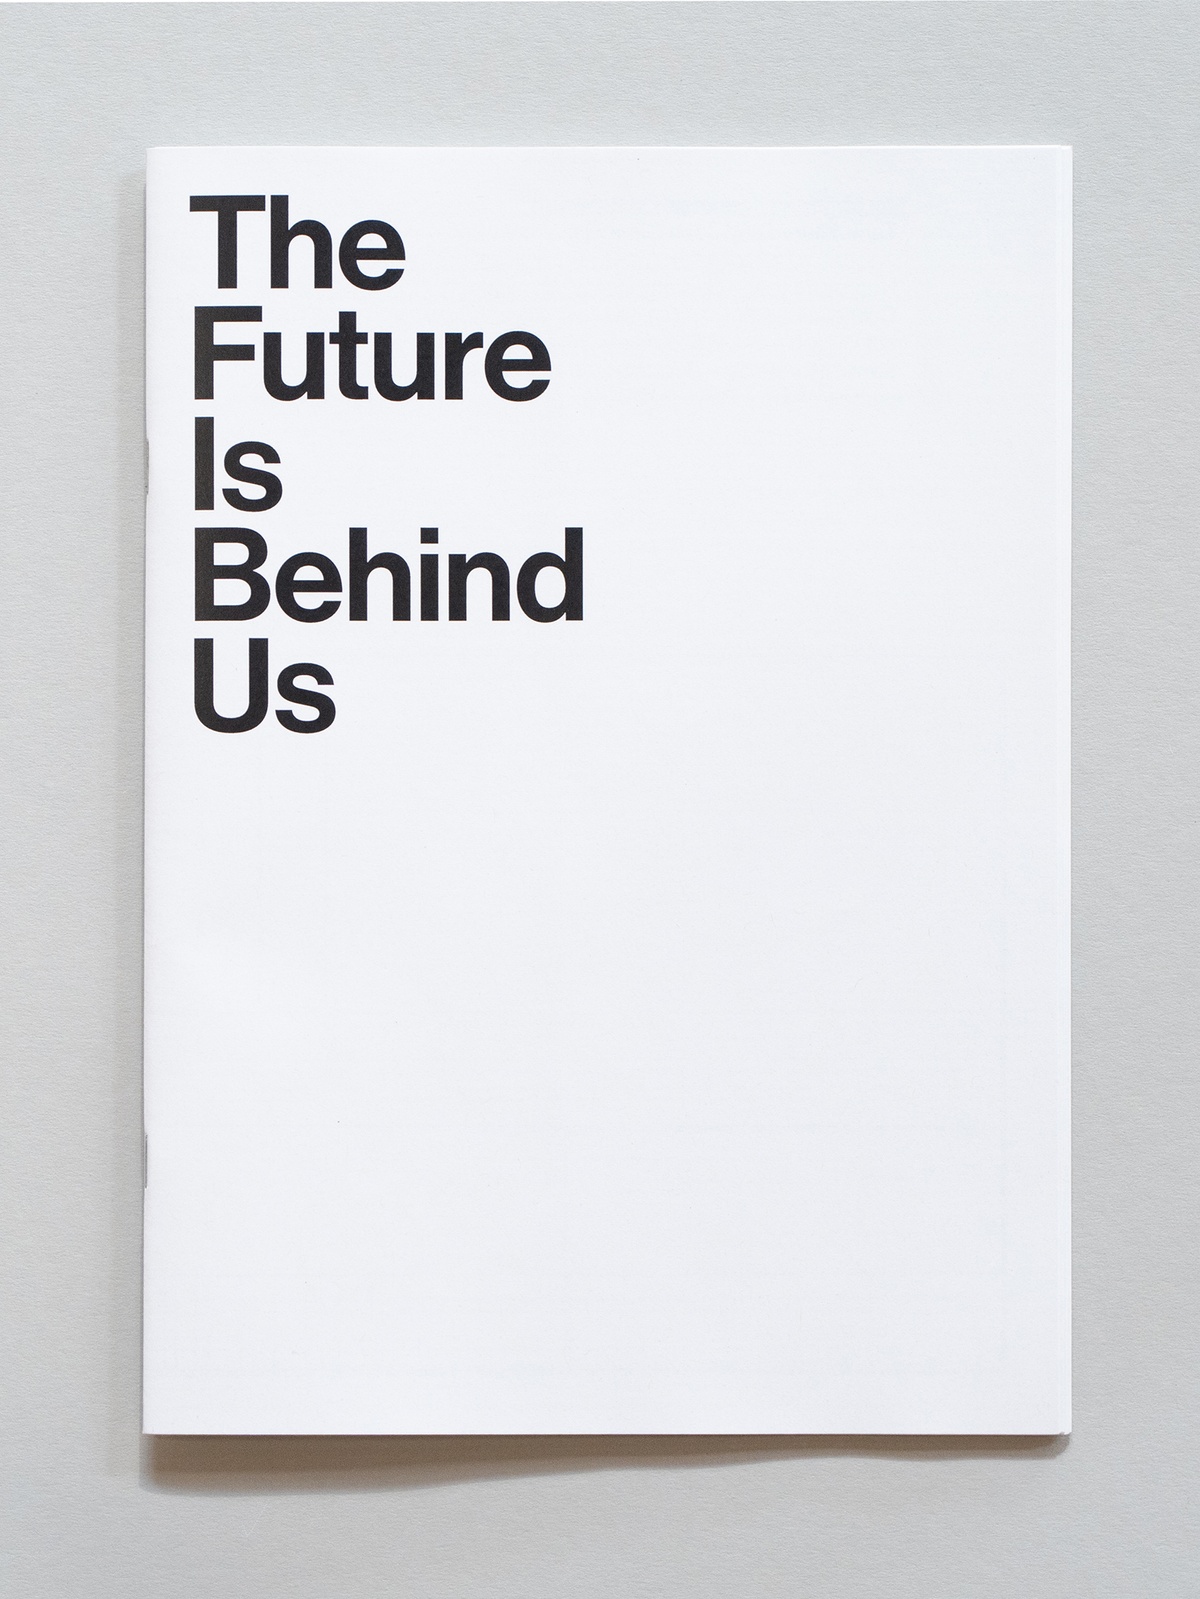 Photograph of the wayfinder publication for The Future is Behind Us, curated by Josh Ginsburg in A4 Arts Foundation's Gallery.
